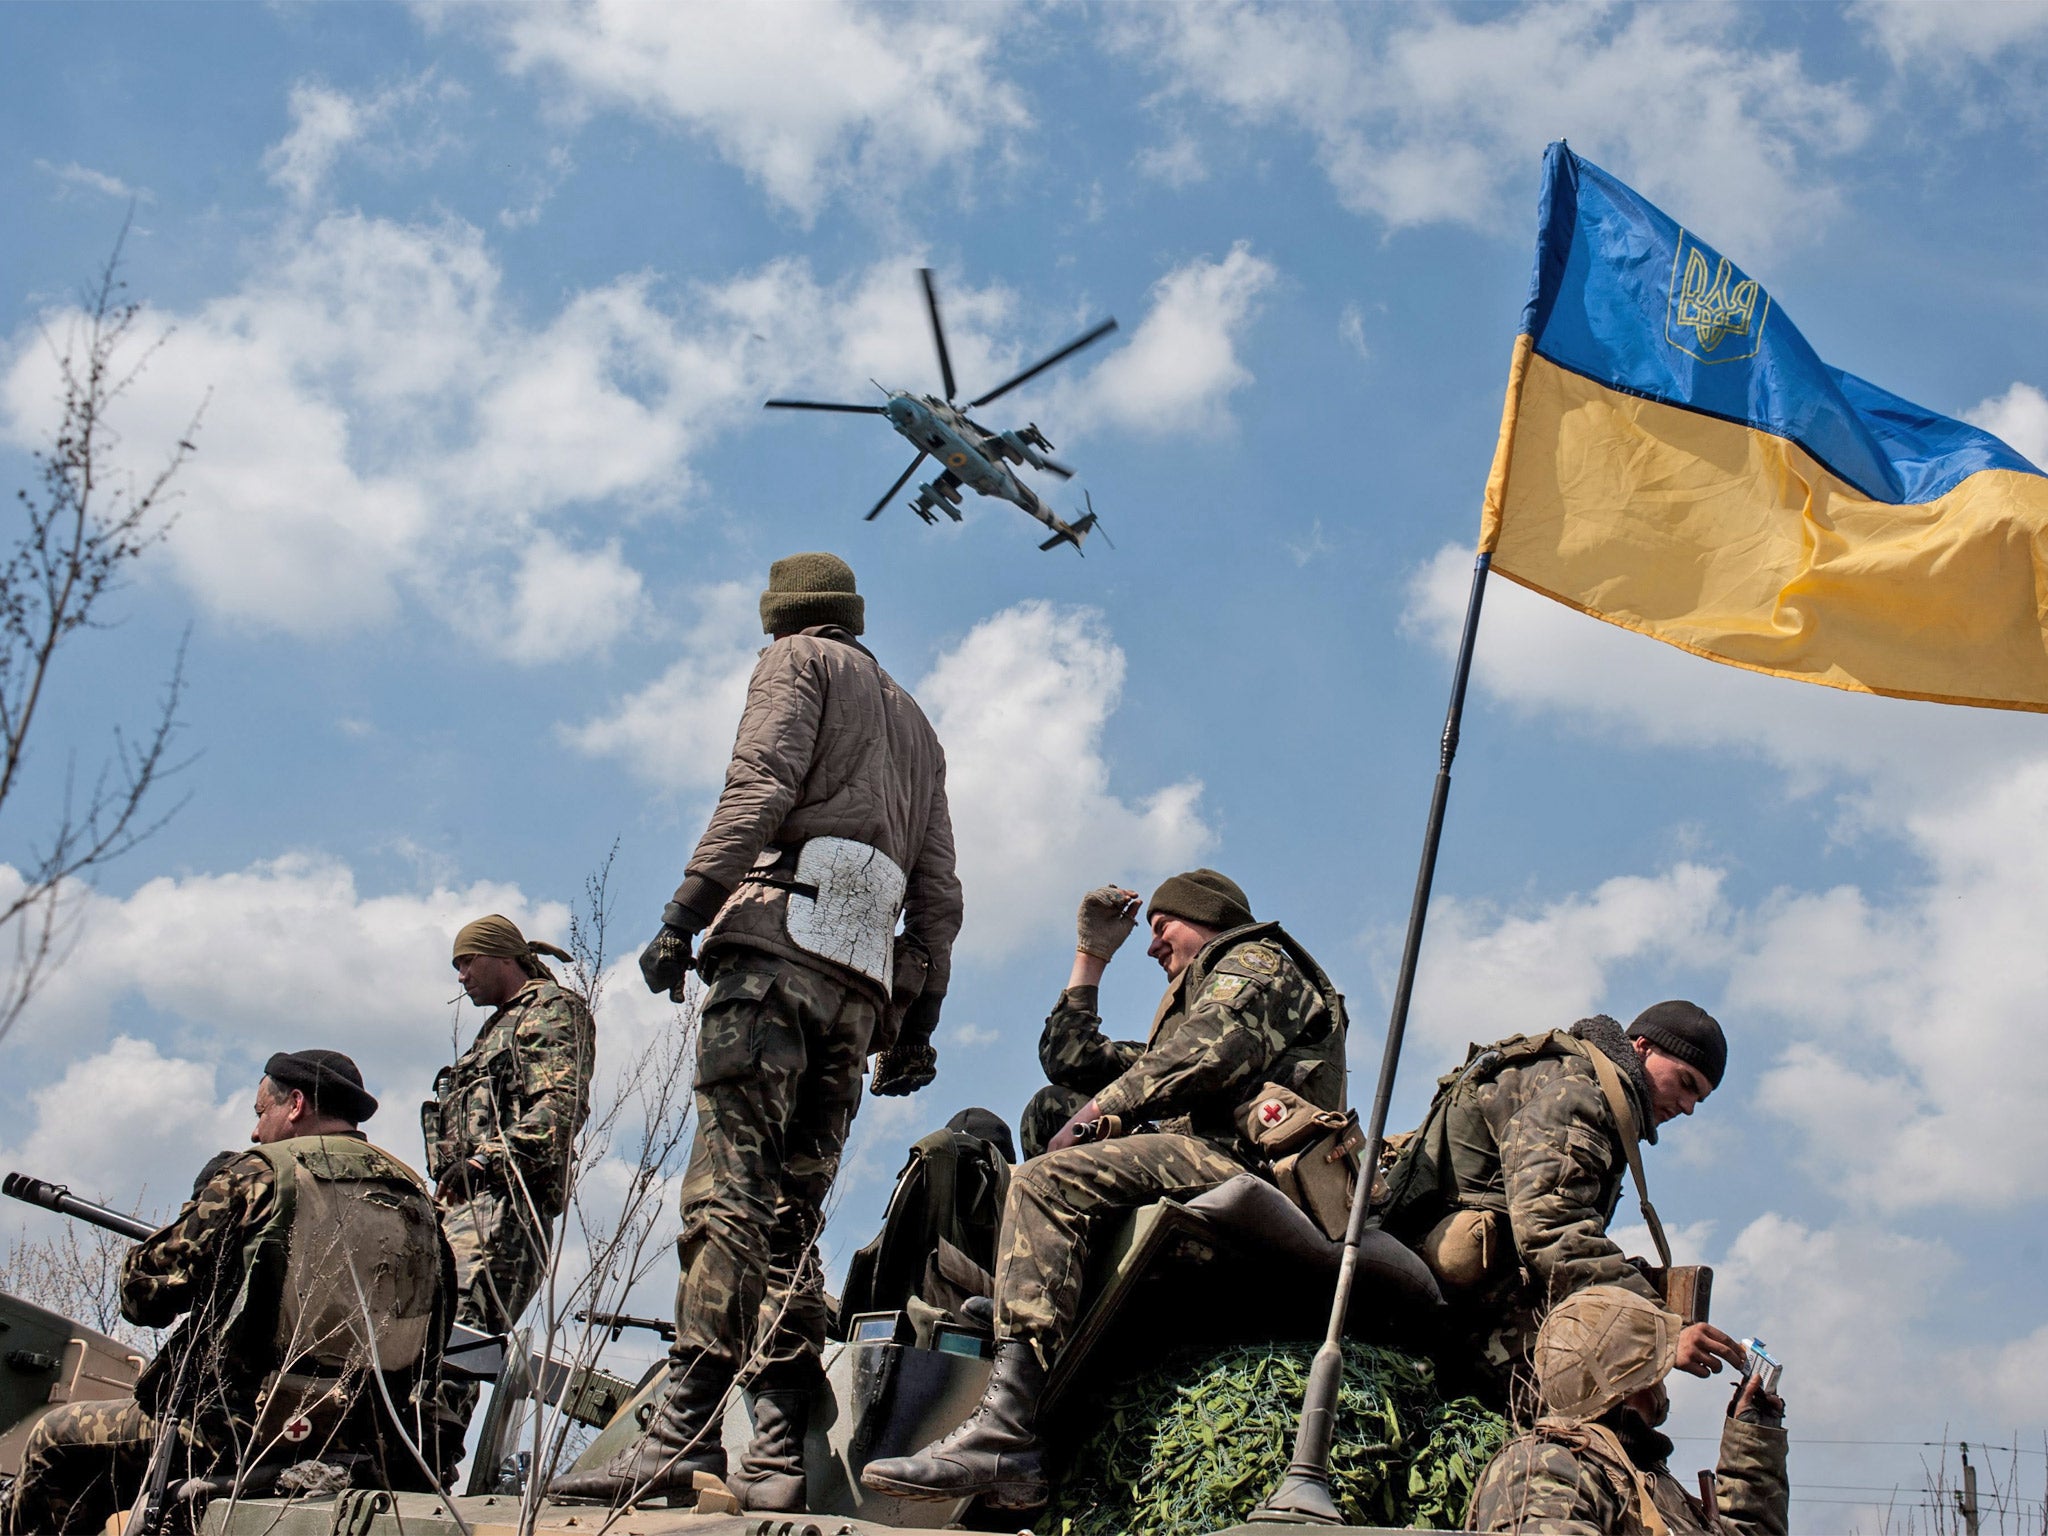 Ukrainian soldiers fly the flag on top of their armoured vehicle in Kramatorsk